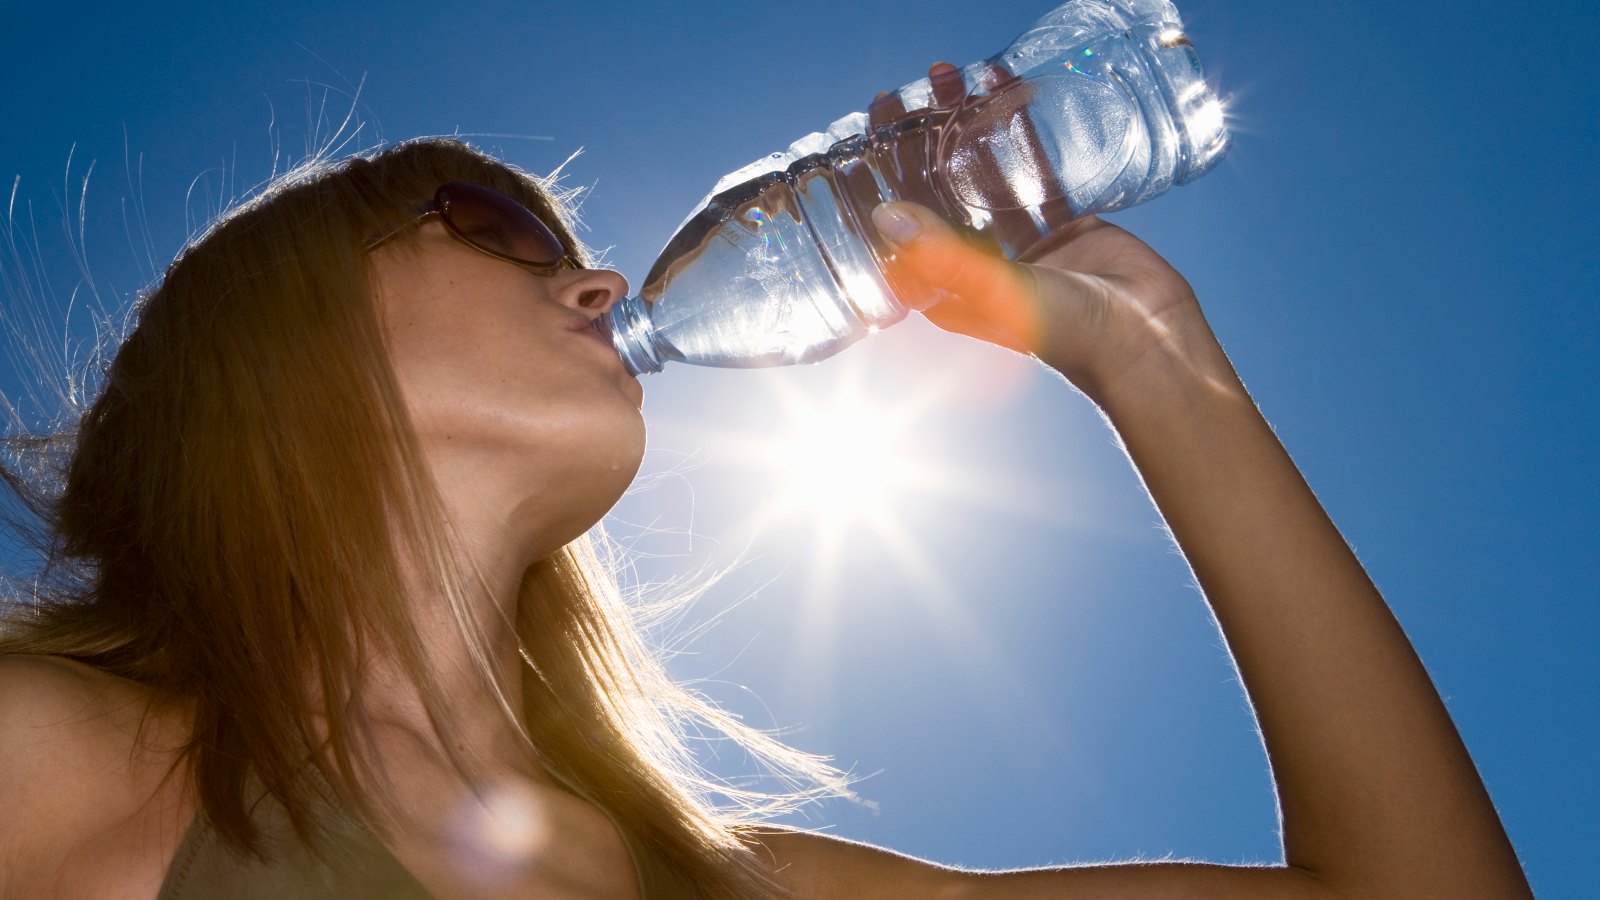 Woman drinking water, low angle view against sky with sun